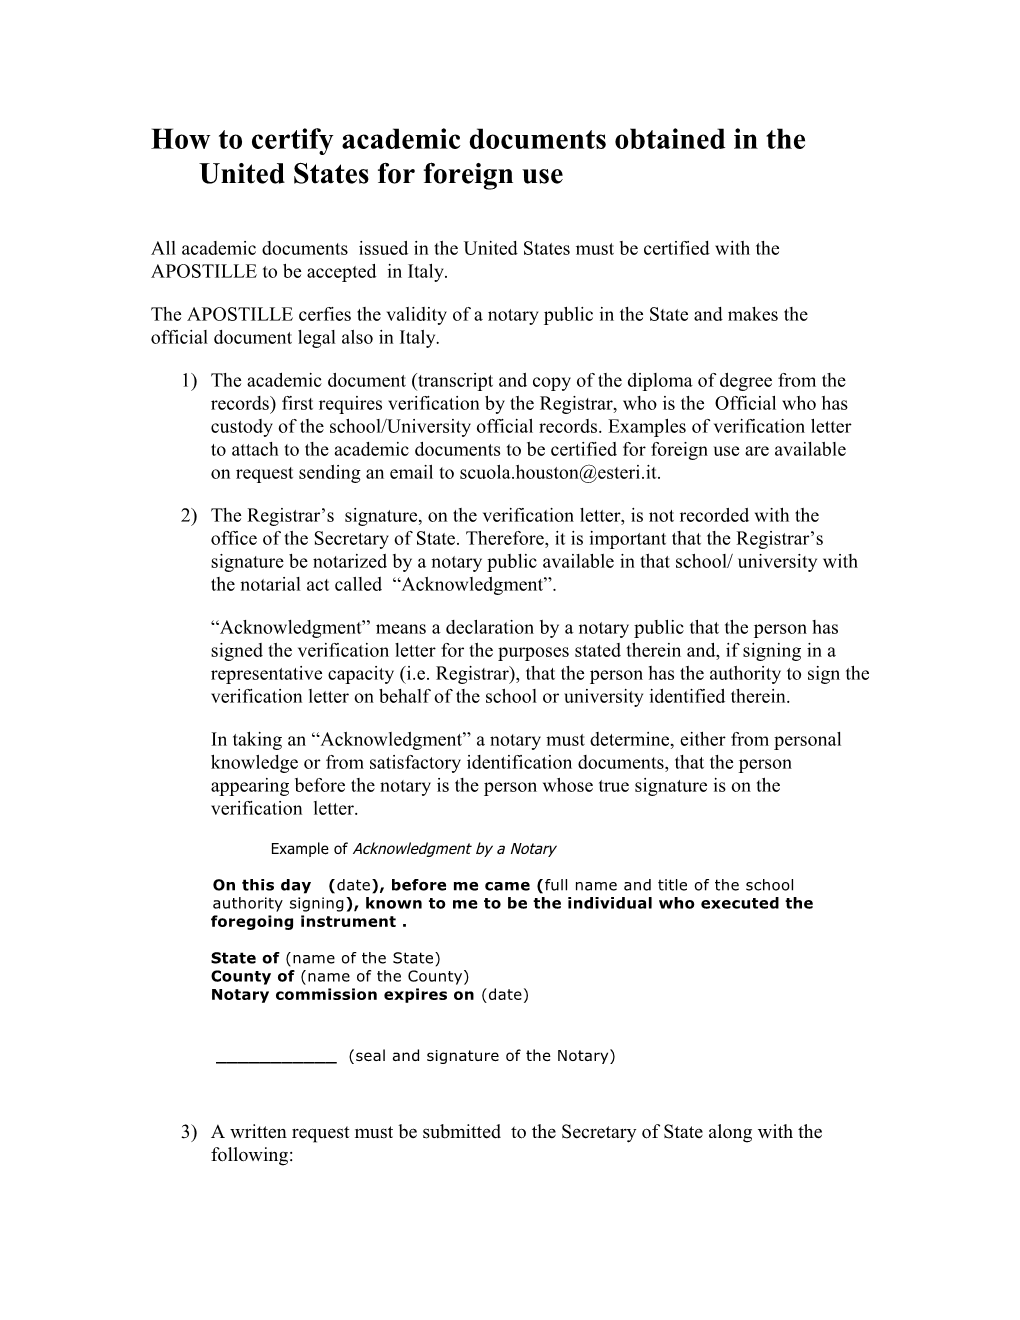 How to Certify Academic Documents Obtained in the United States for Foreign Use